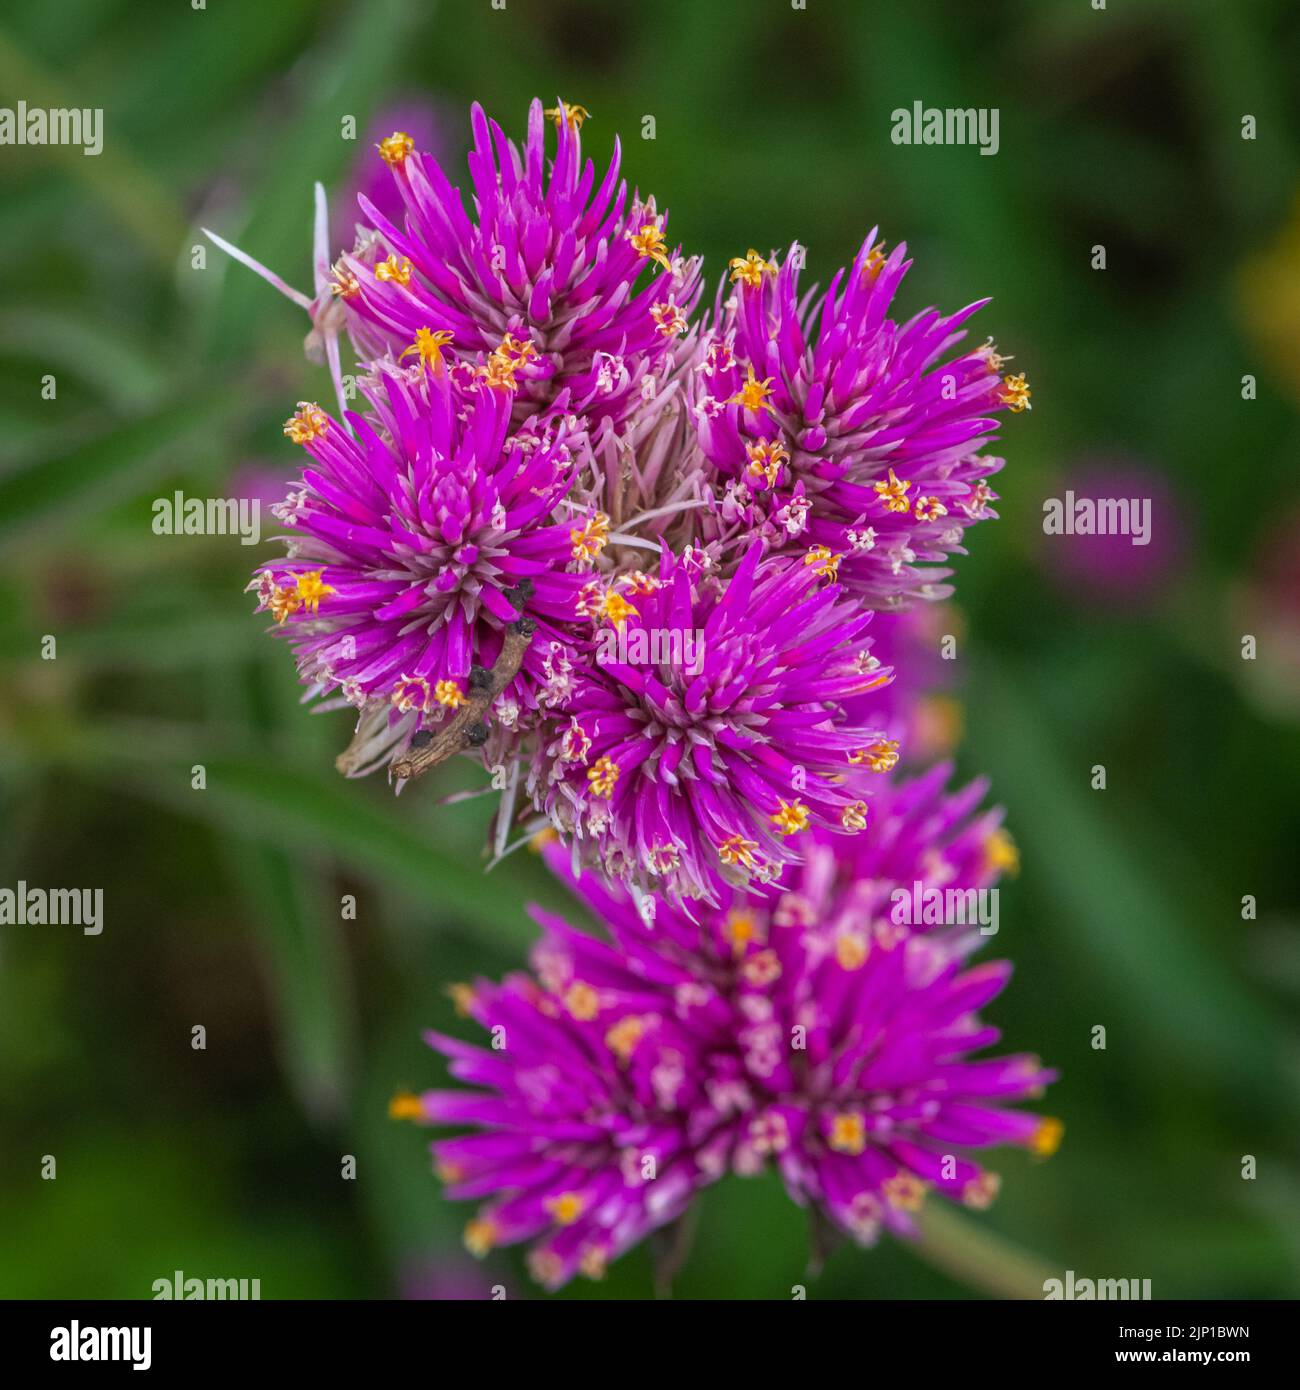 close-up of a Gomphrena pulchella, bursting with two sparkling pink flower clusters. Stock Photo